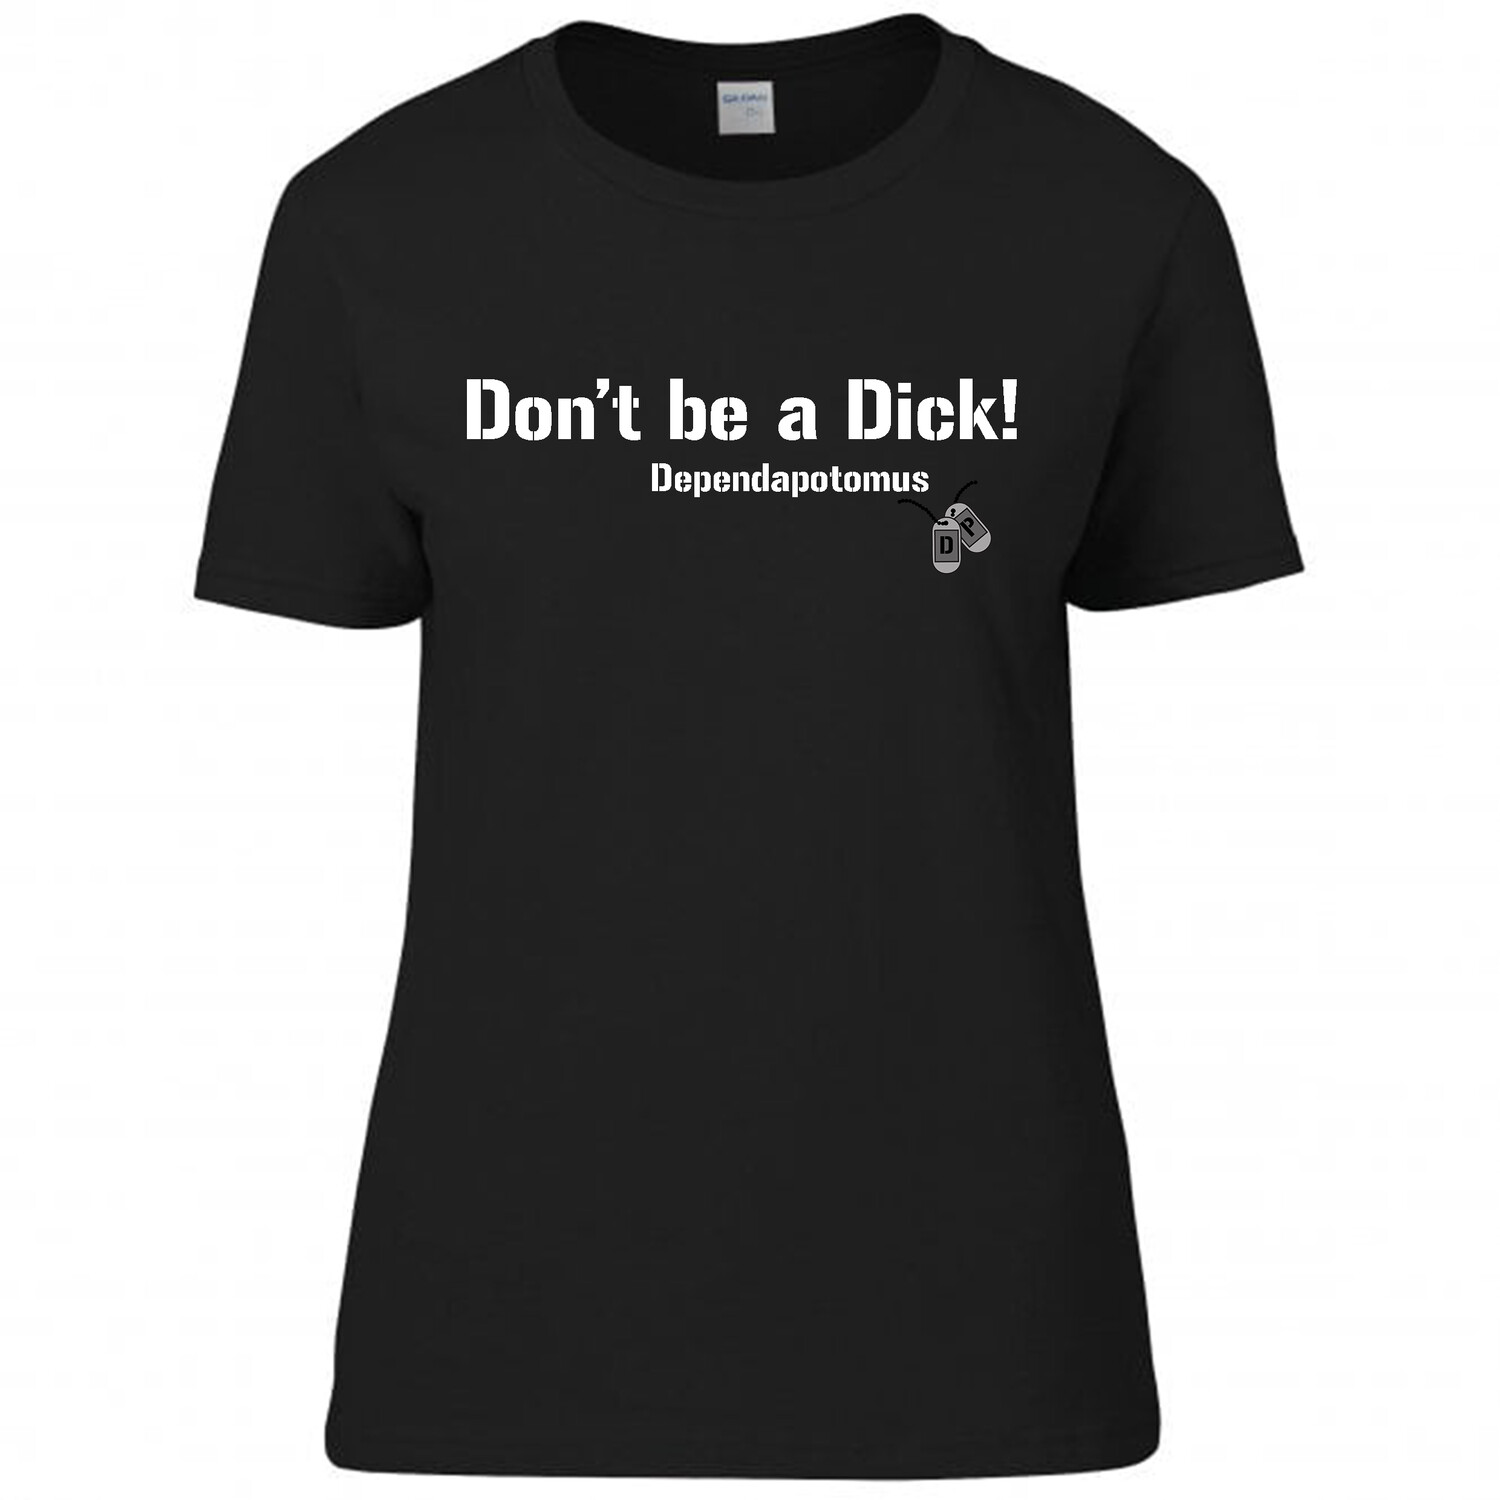 Don't be a DICK Tshirt